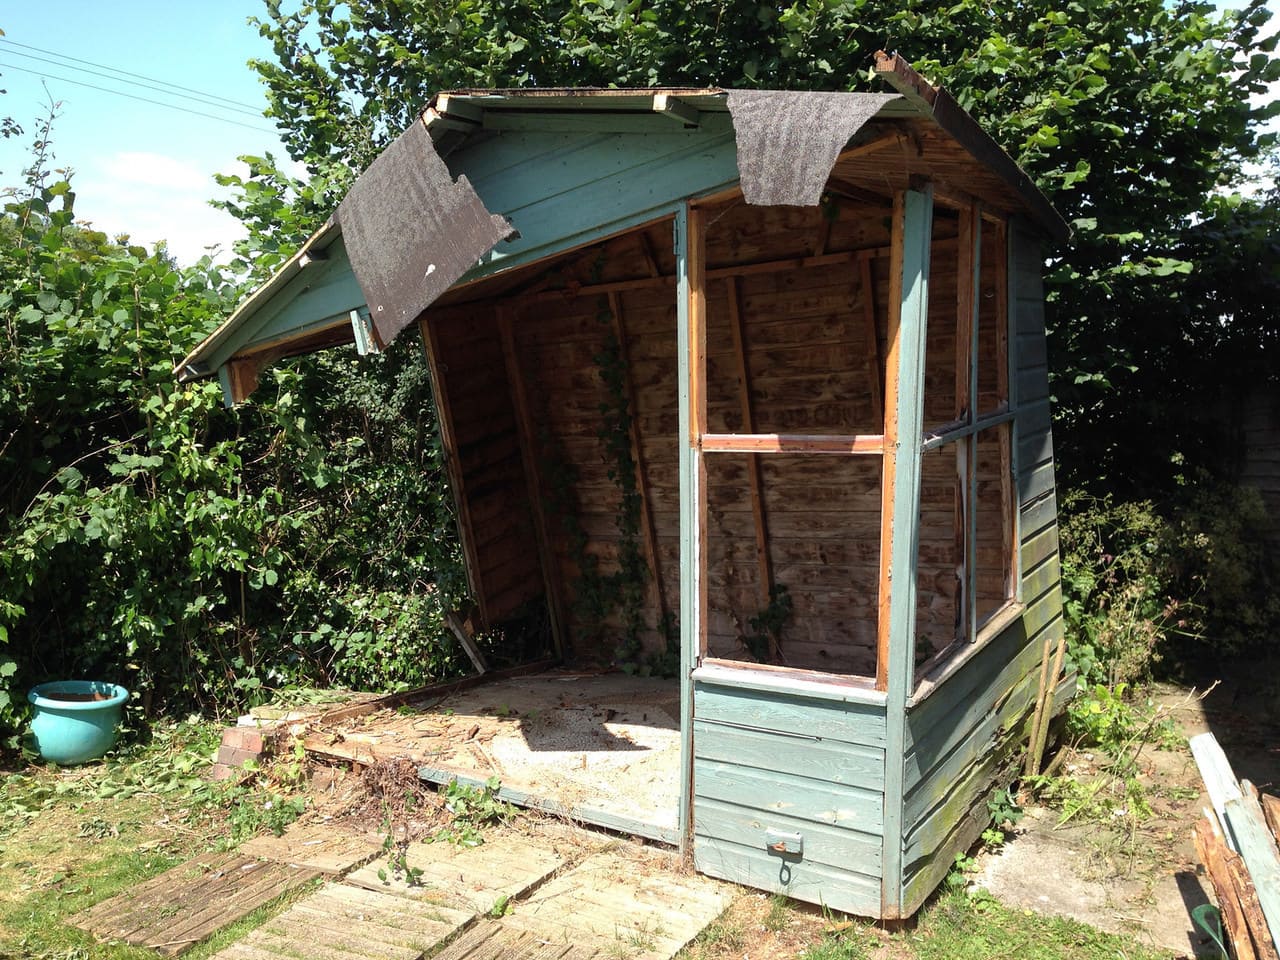 A rather fragile looking summerhouse